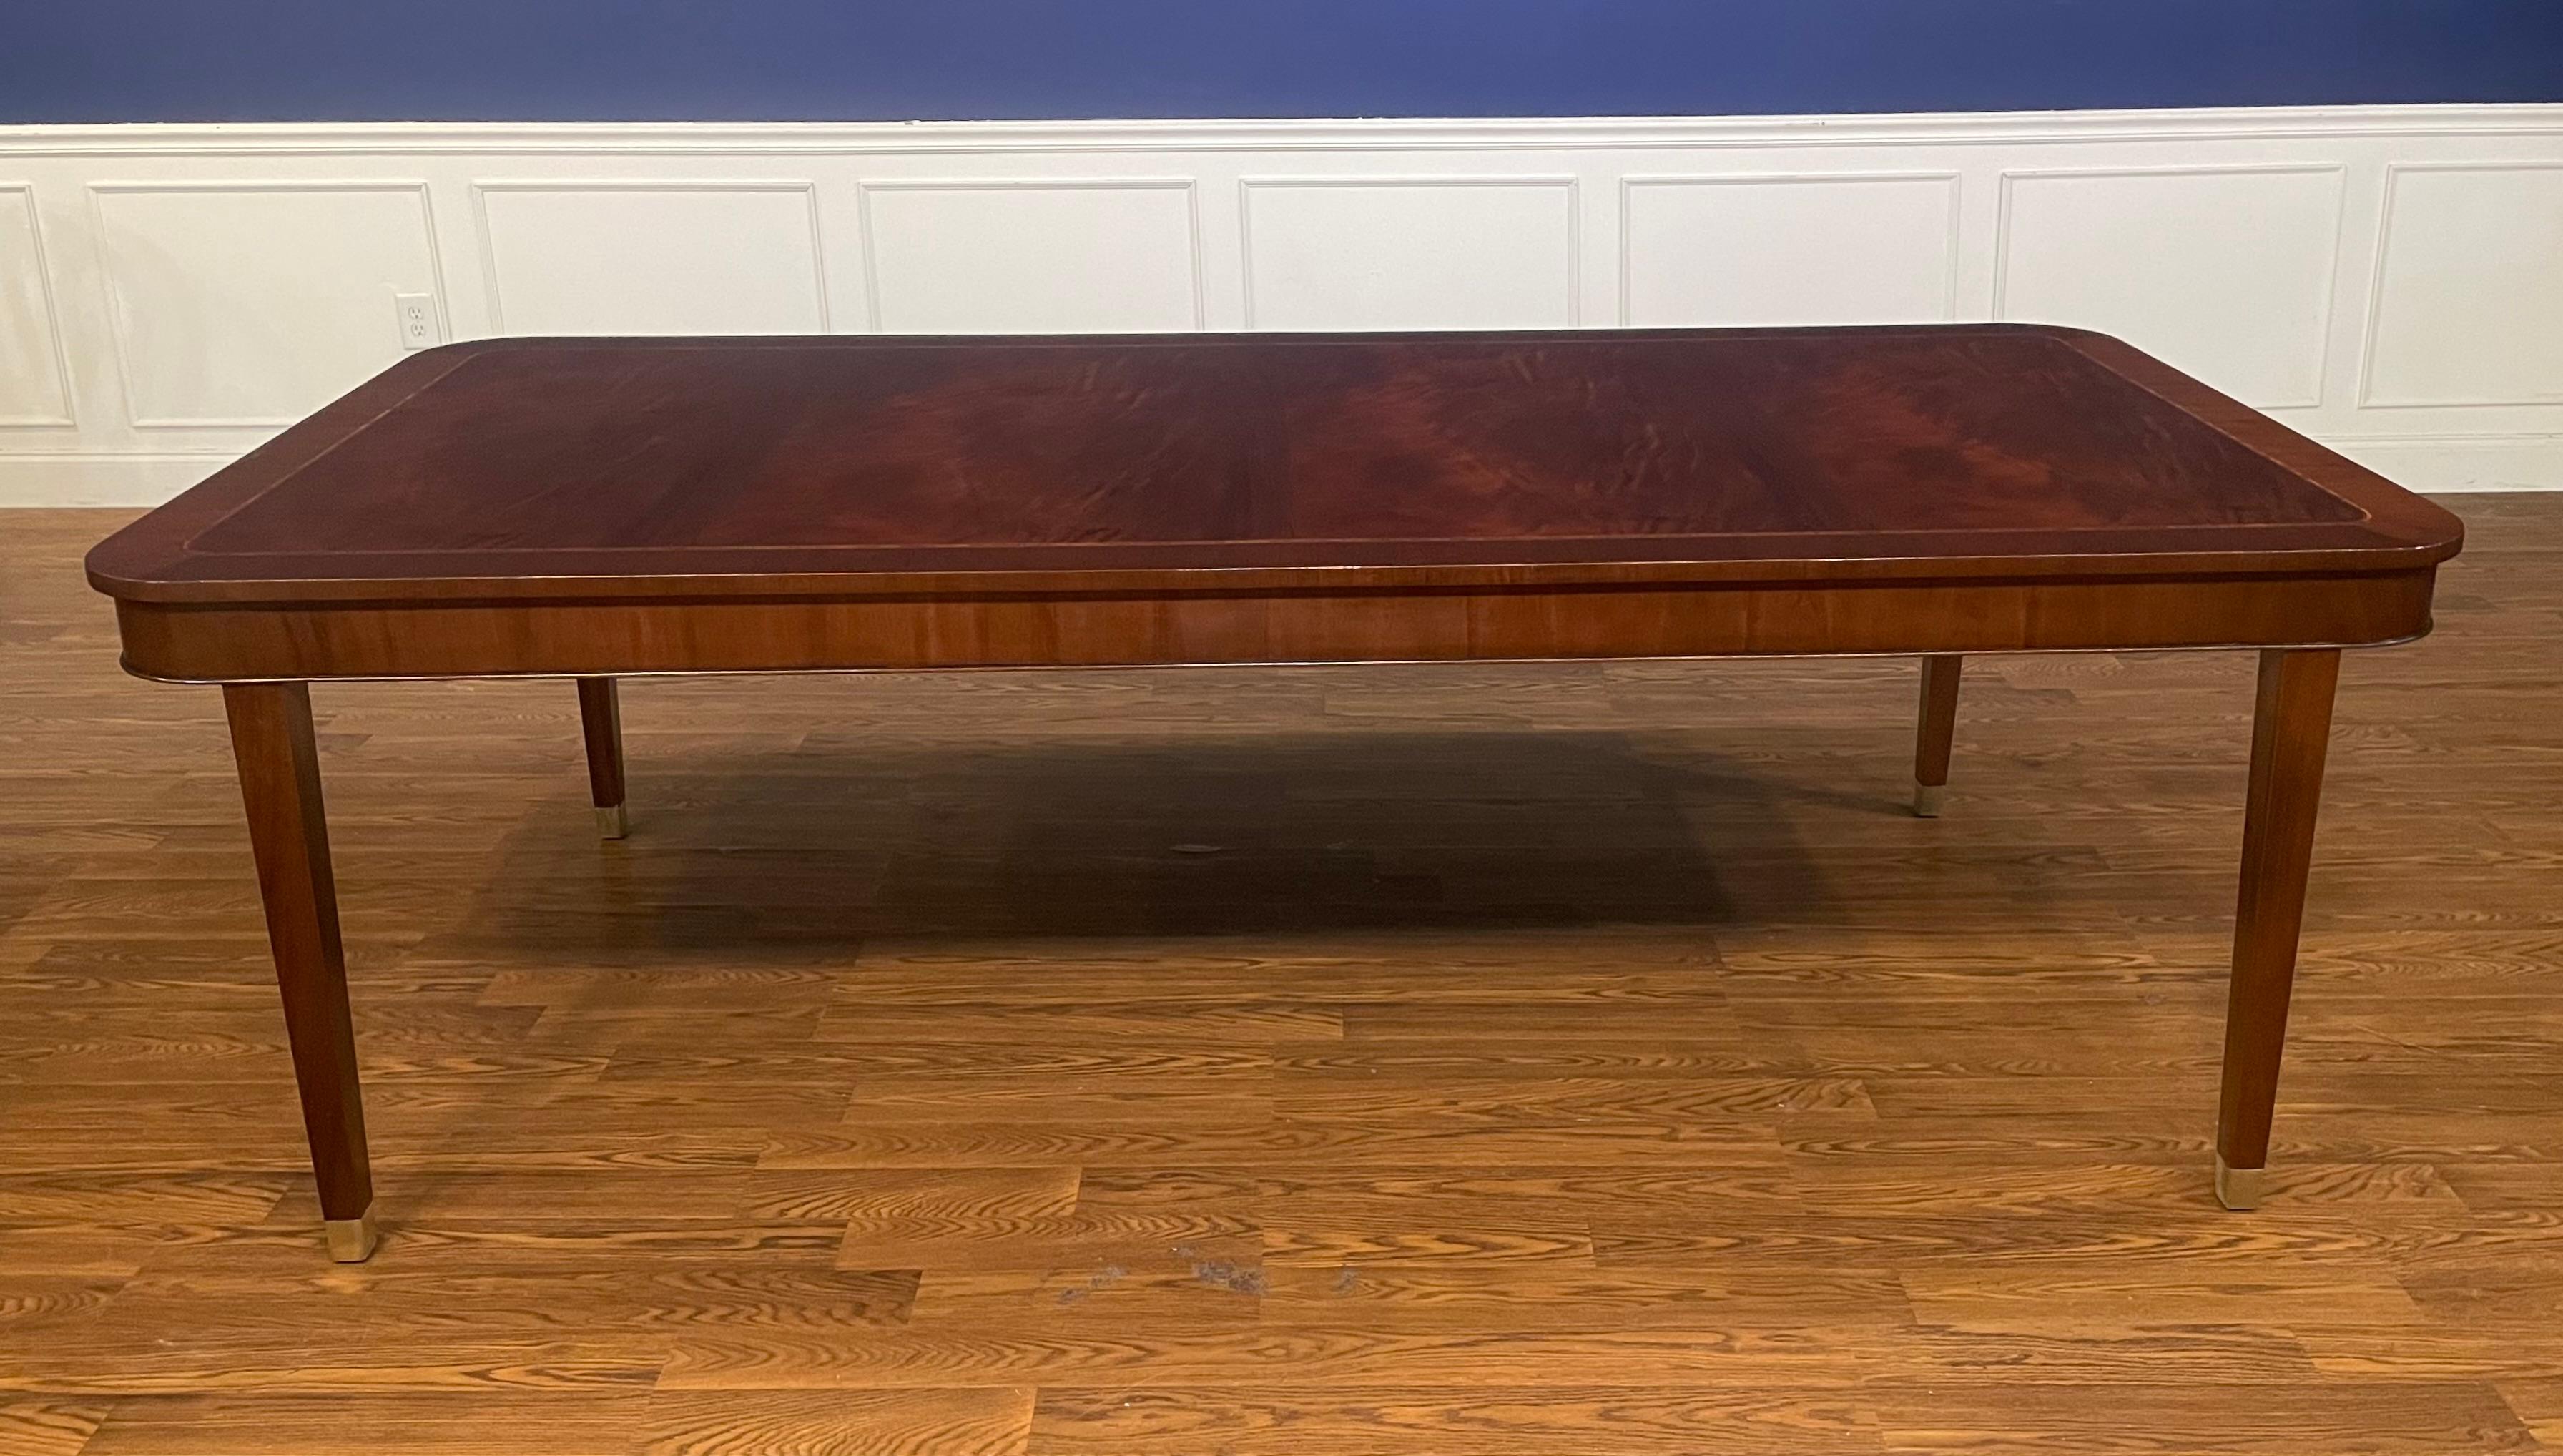 This table is made-to-order in the Leighton Hall shop in Suwanee, Georgia. It features classic Hepplewhite styling with a swirly crotch mahogany field, straight grain mahogany border and classic Hepplewhite style square tapered legs. The legs